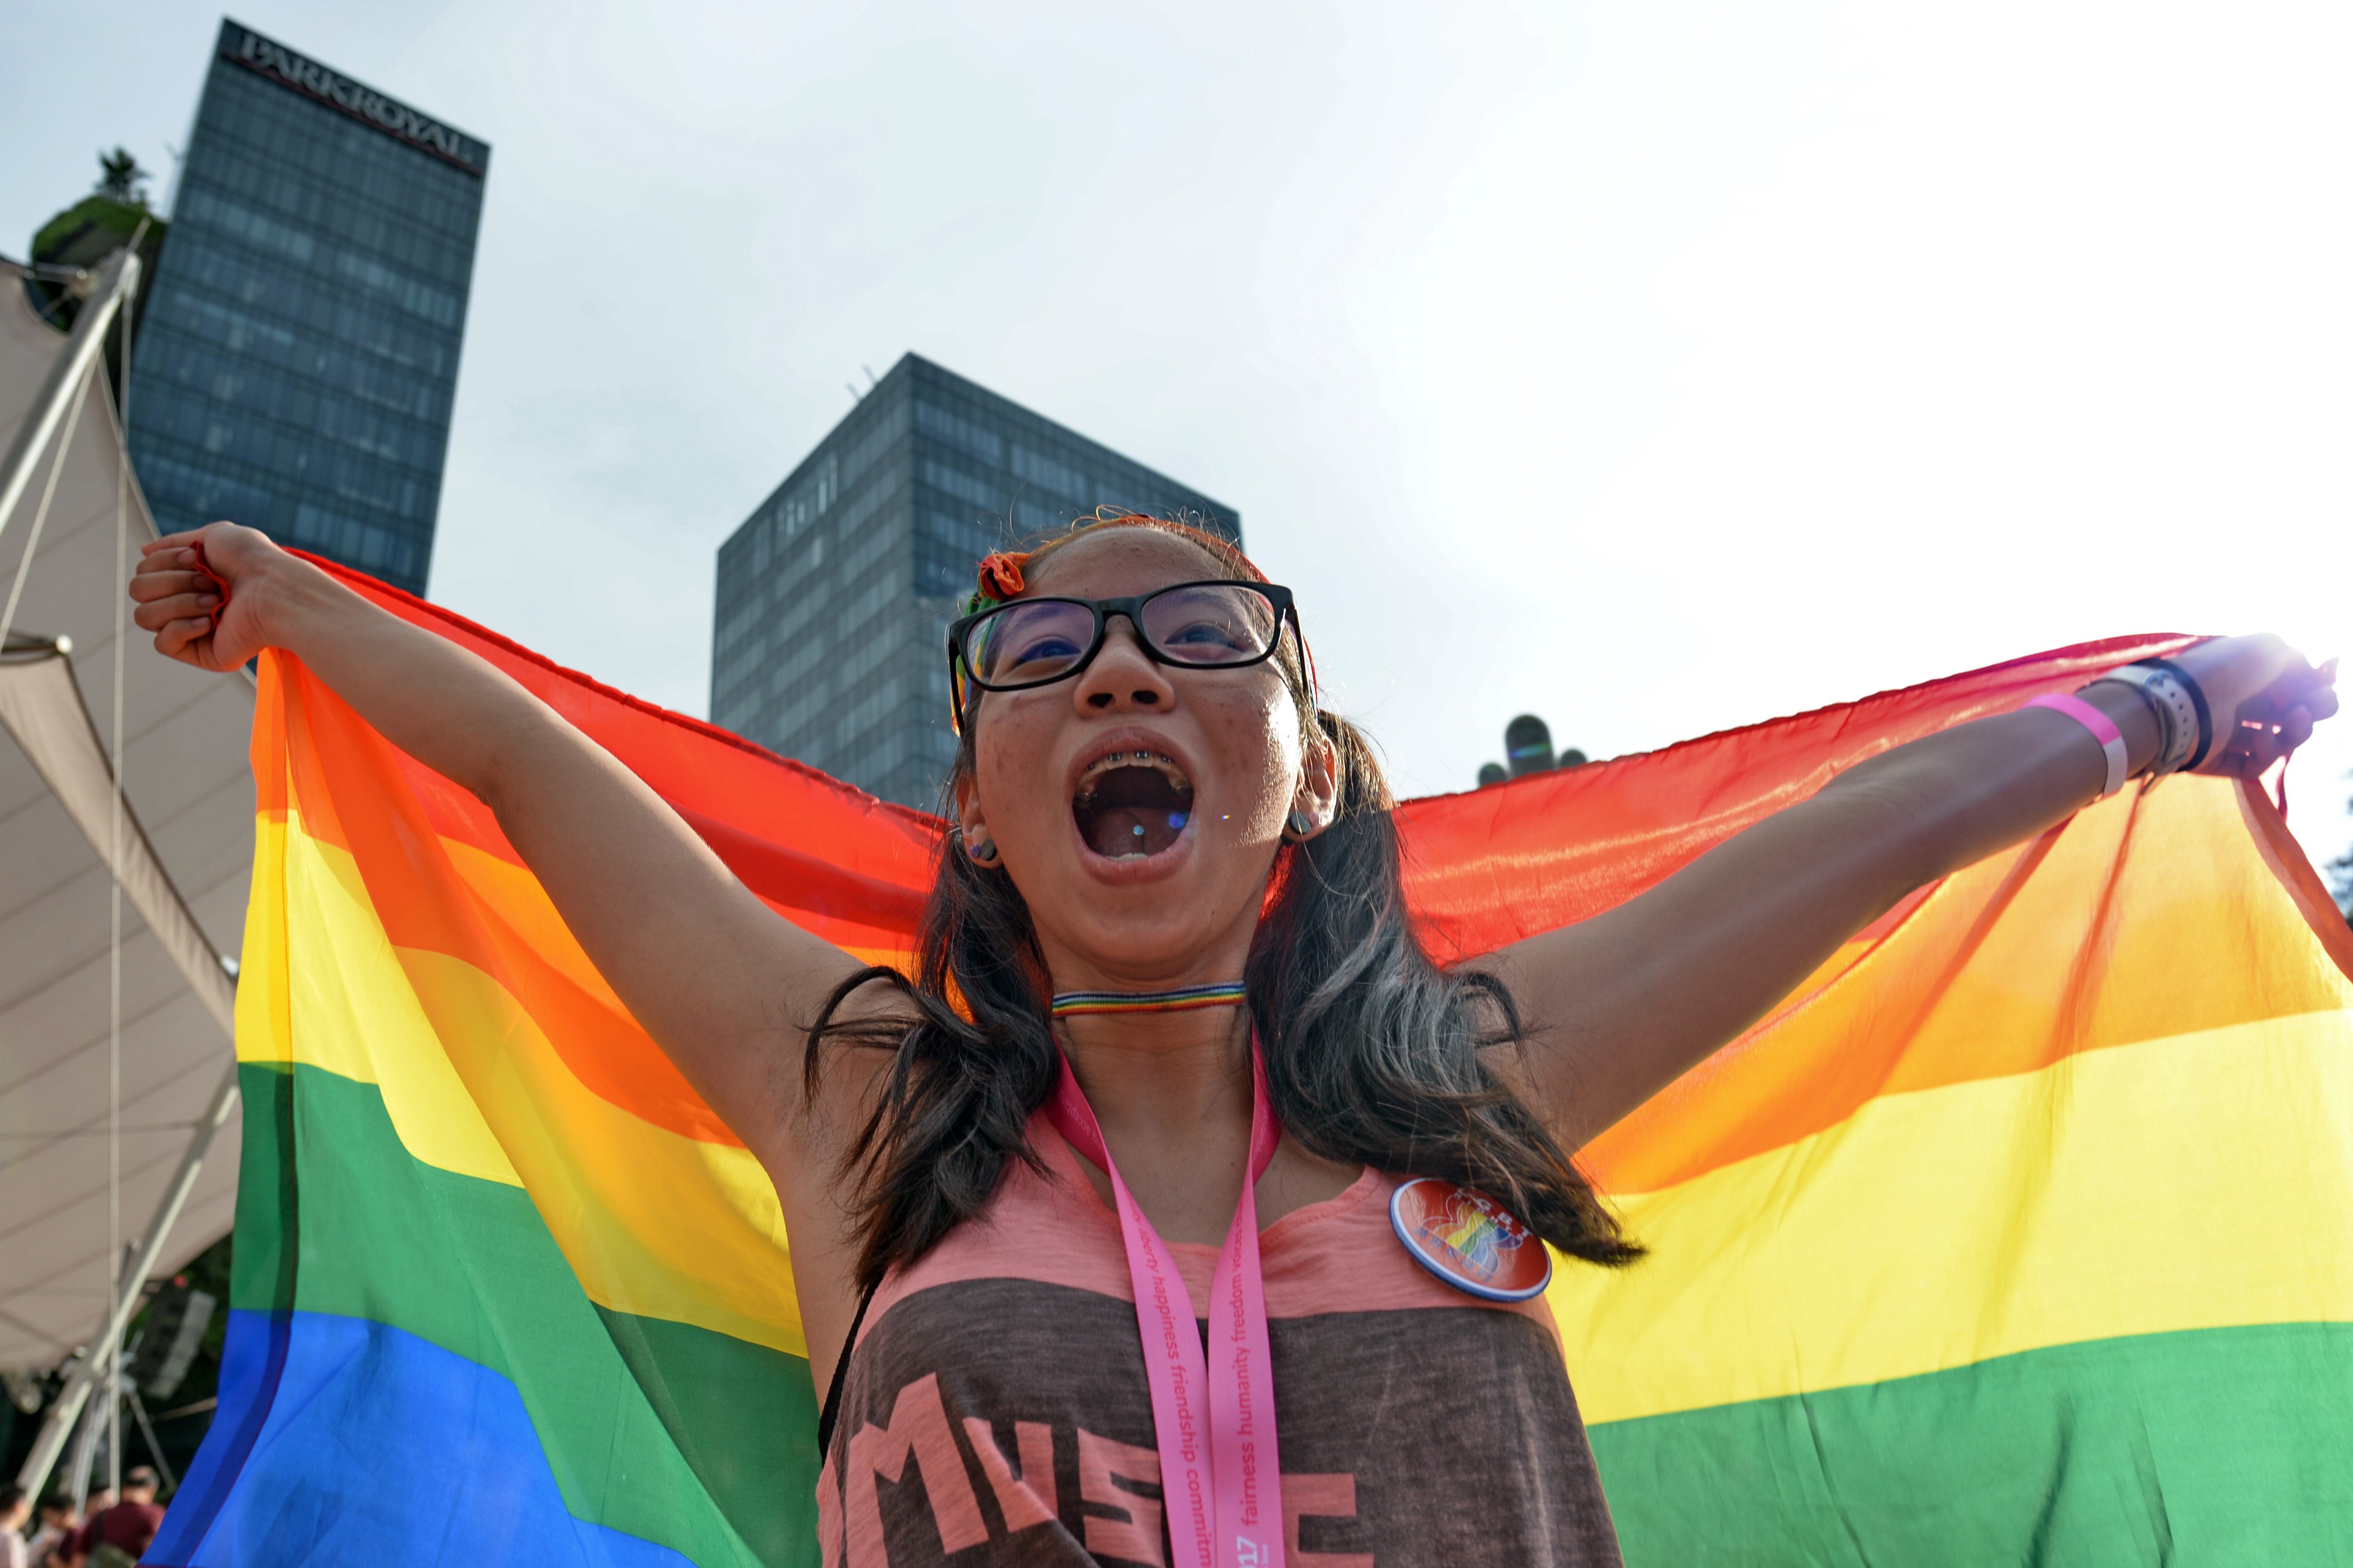 A supporter at Singapore’s Pink Dot LGBT event in 2017. Photo: AFP